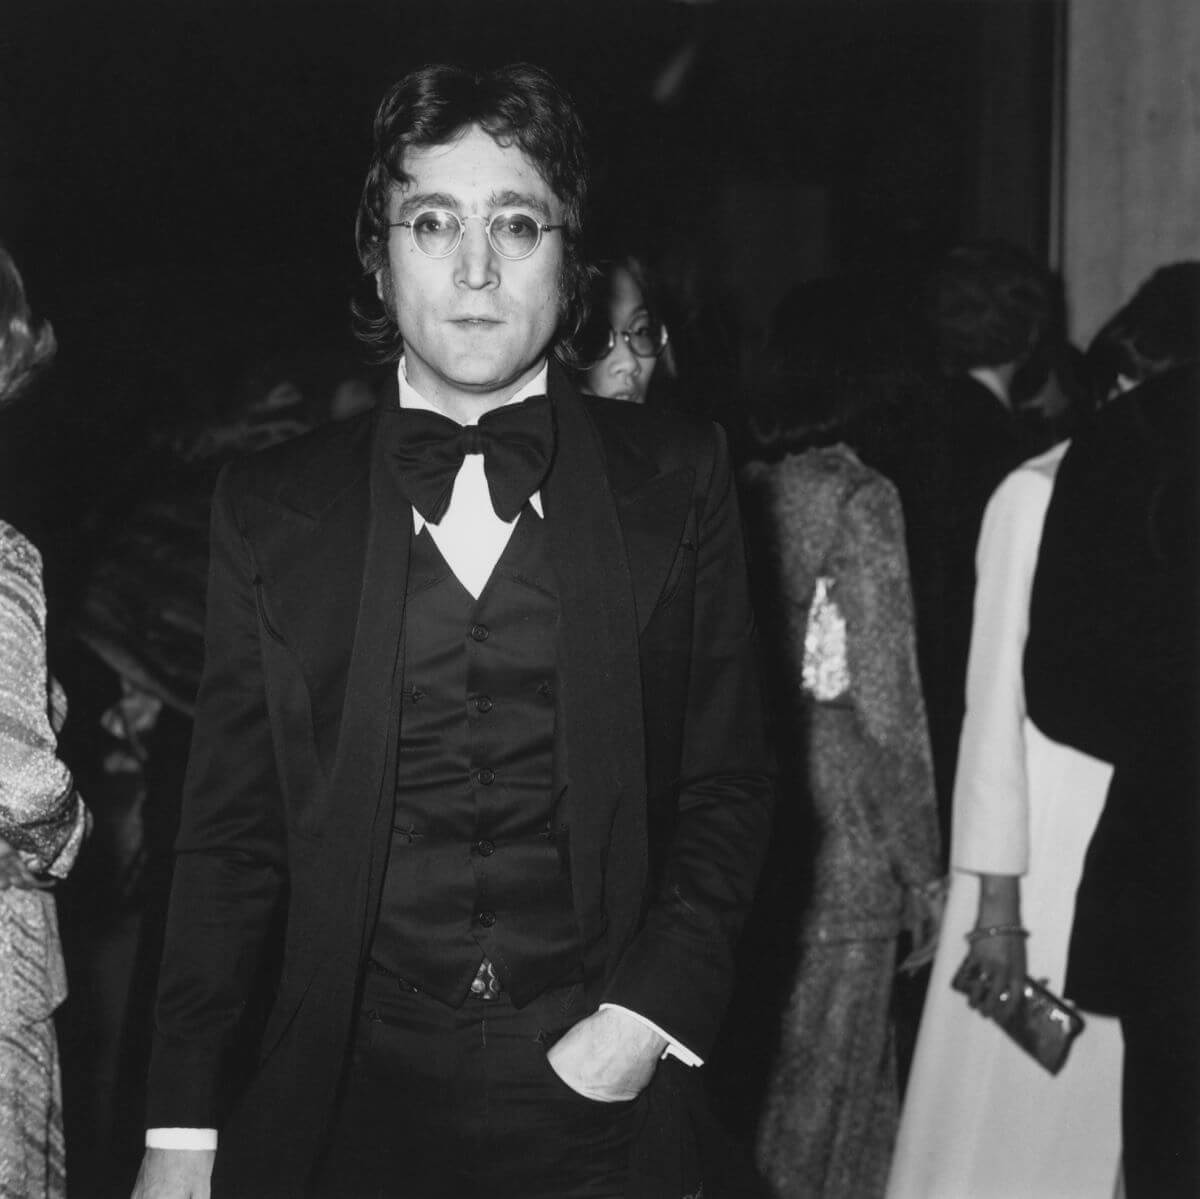 A black and white picture of John Lennon wearing glasses and a tuxedo.